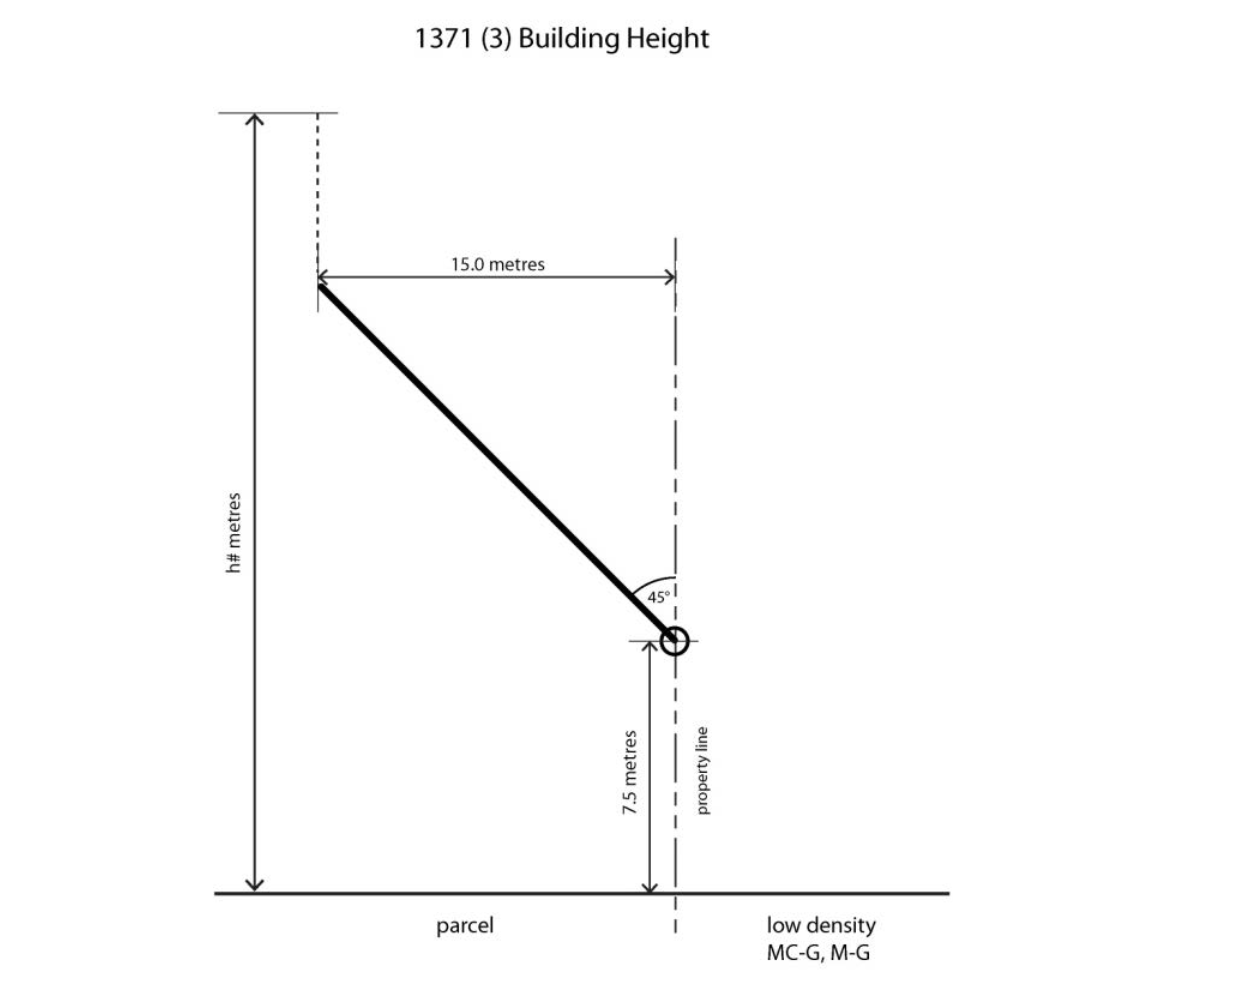 1371 building height